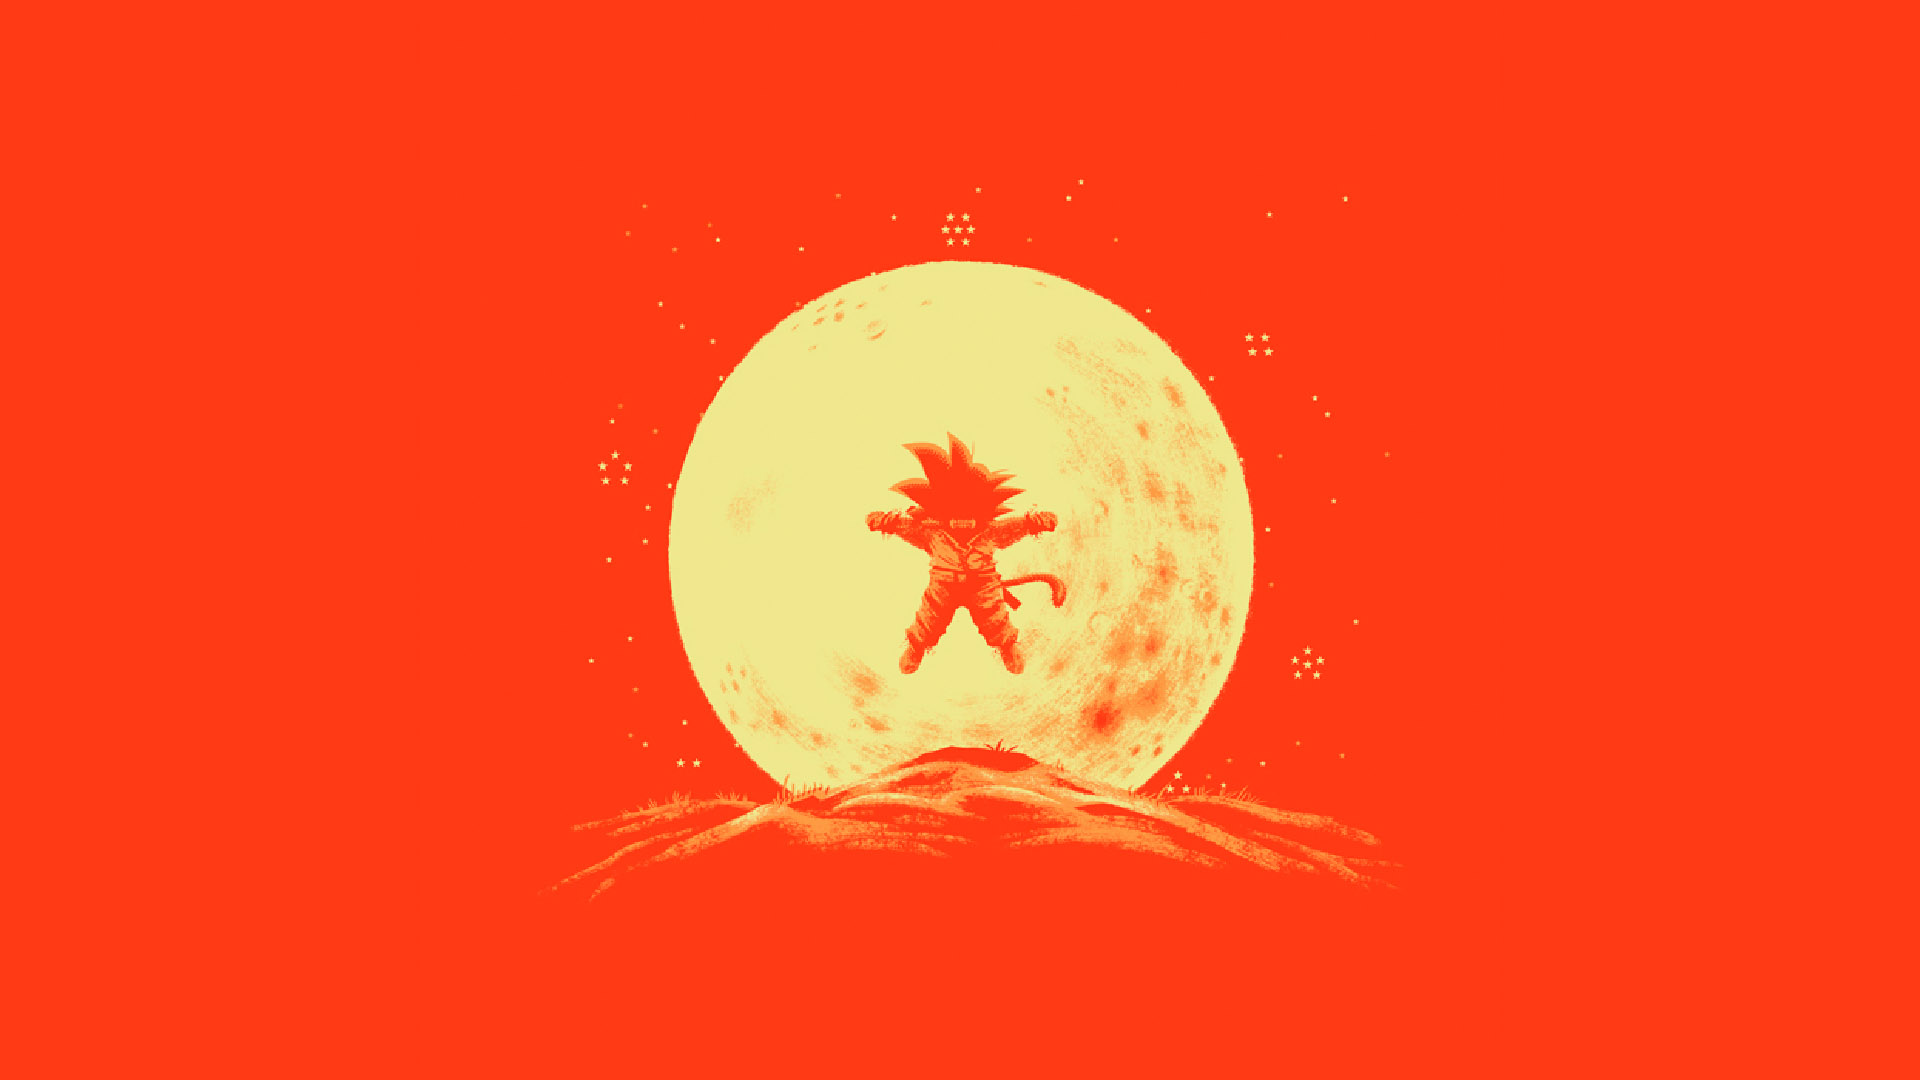 Goku Wallpaper That Was On Front Earlier